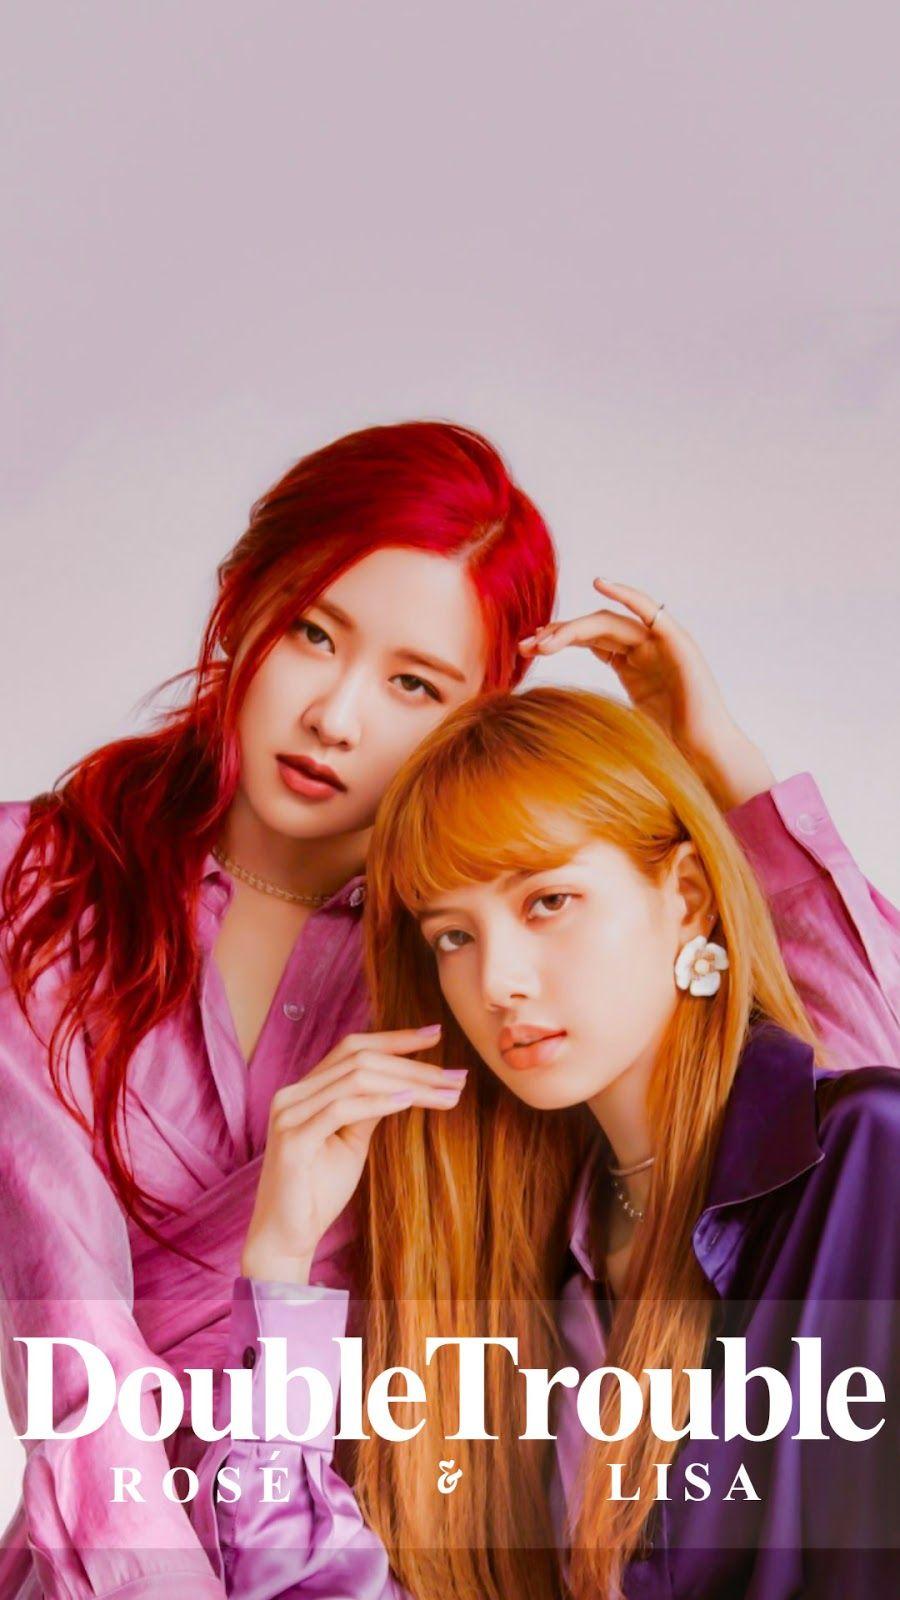 Ready for a Cutie Fest? Check Out These Lisa and Rose Cute Photos